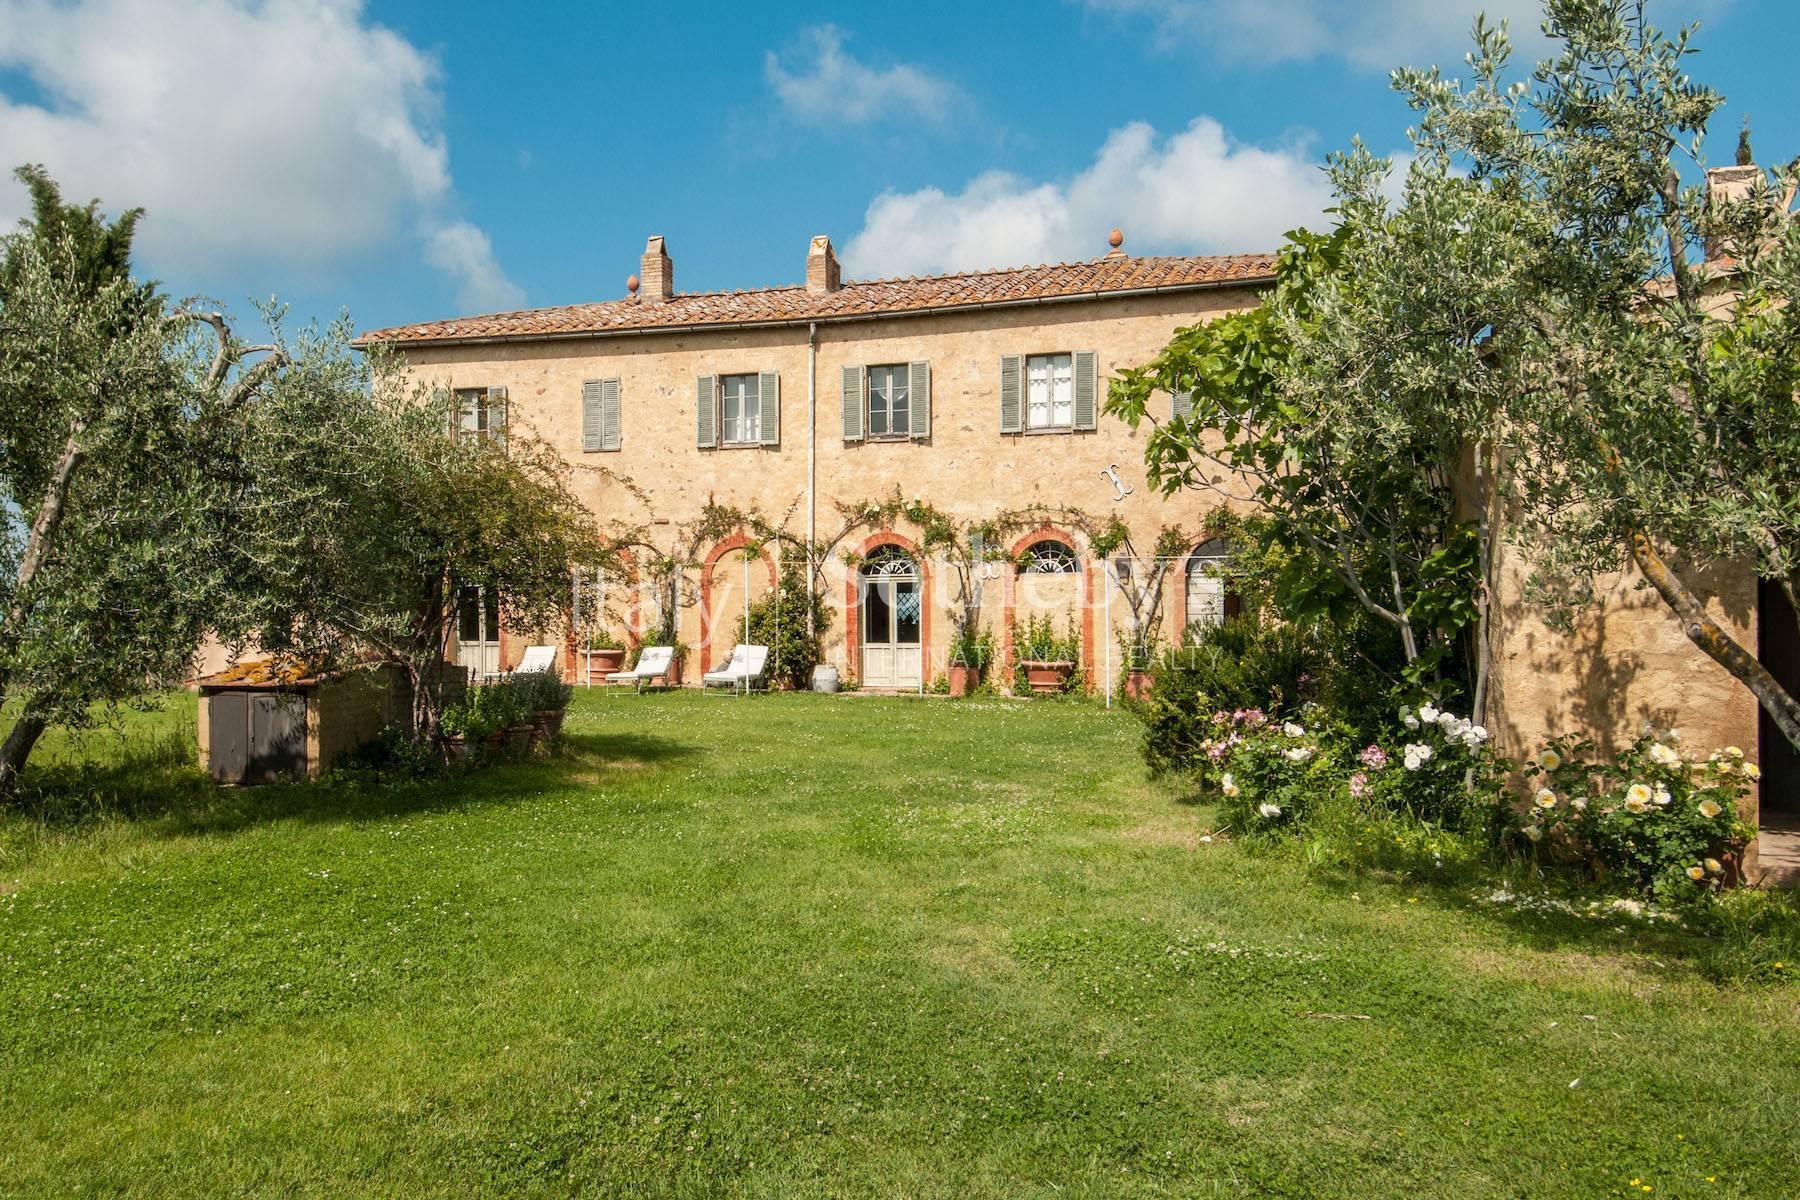 A charming Tuscan villa in the heart of Montalcino - 2